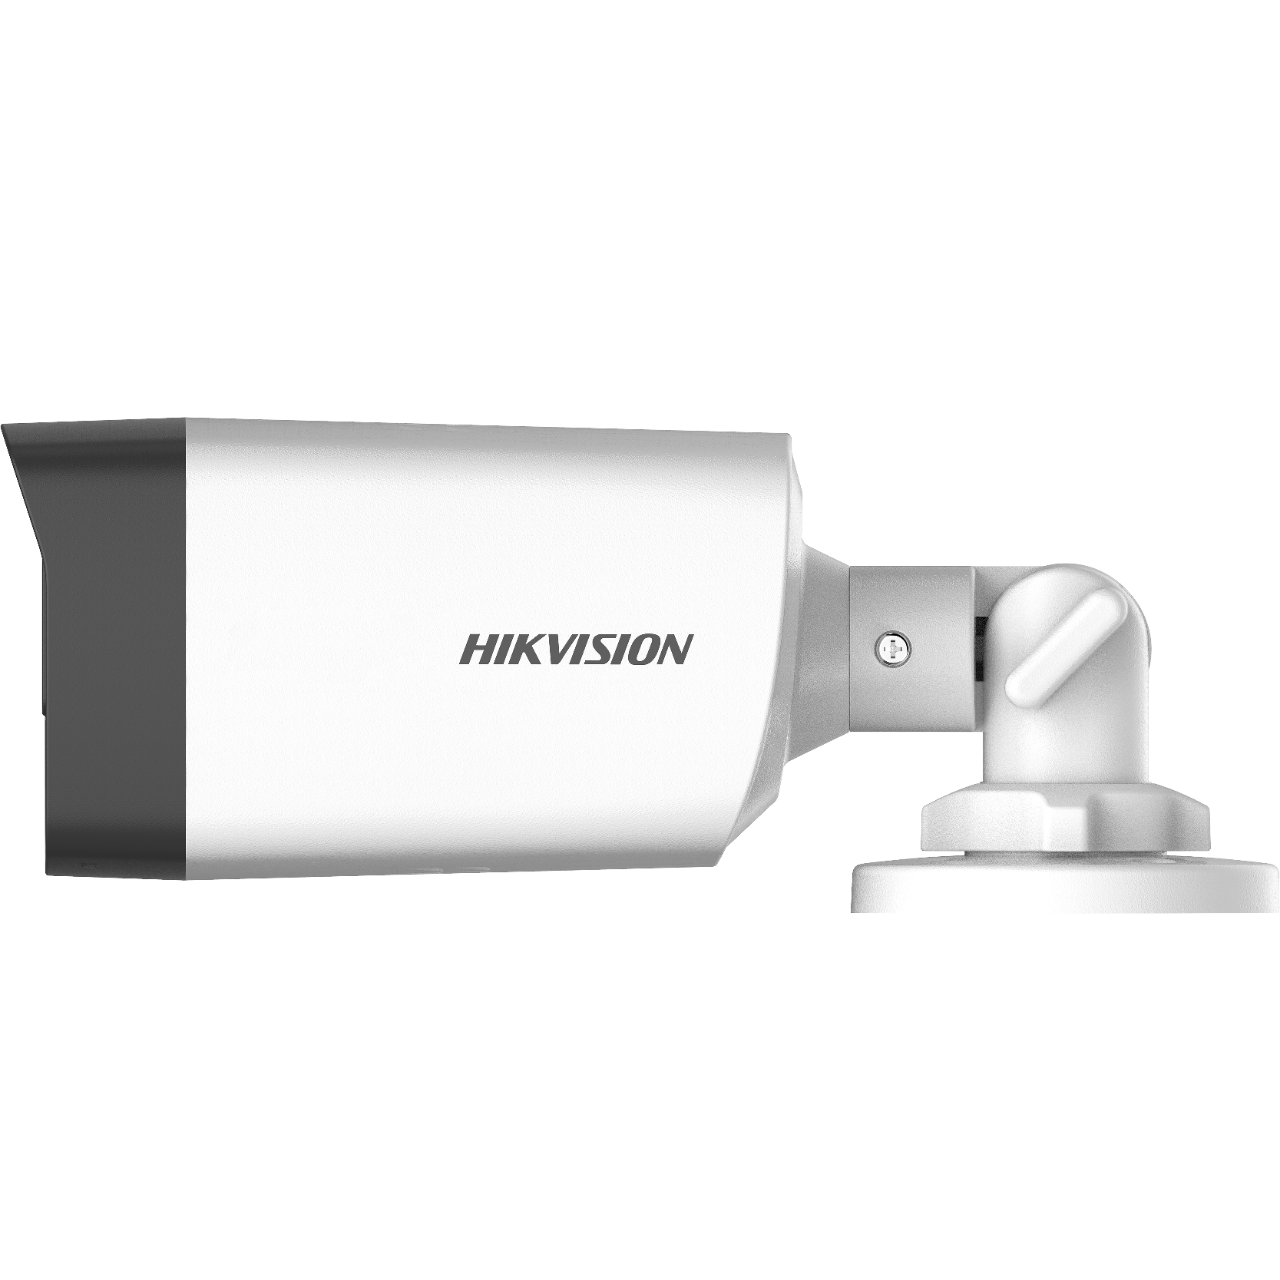 HIKVISION DS-2CE17H0T-IT3FS Turbo HD Camera